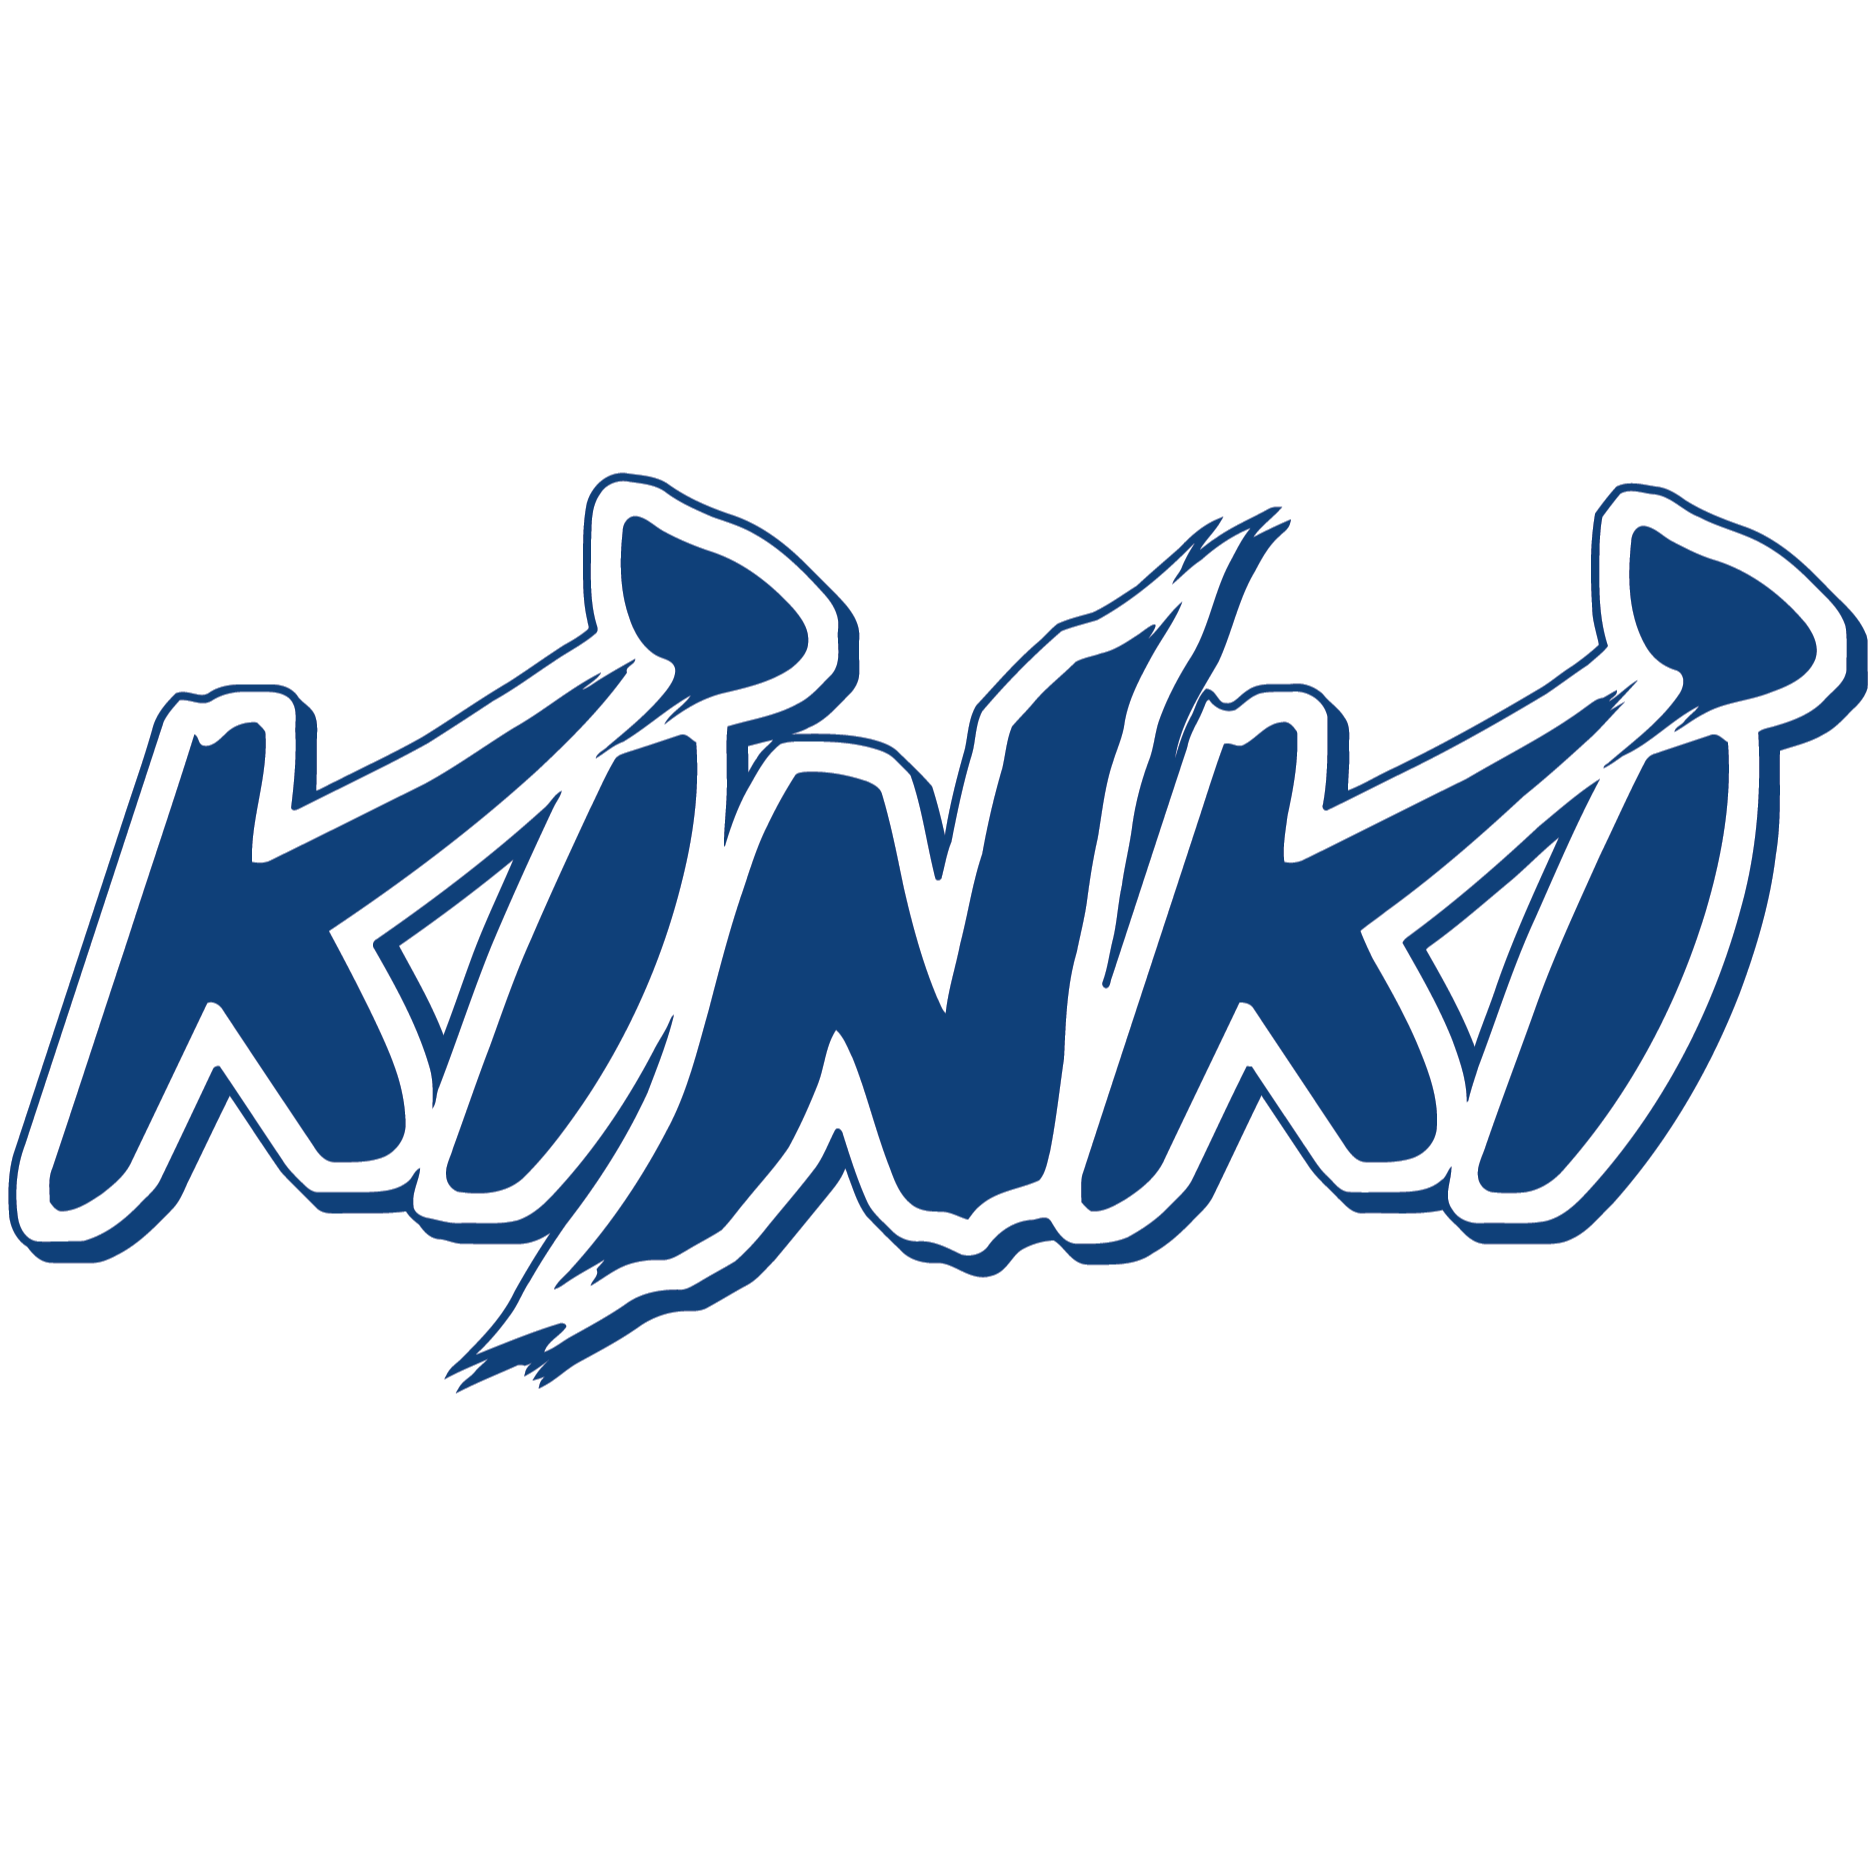 Kinki is now available for islandwide delivery